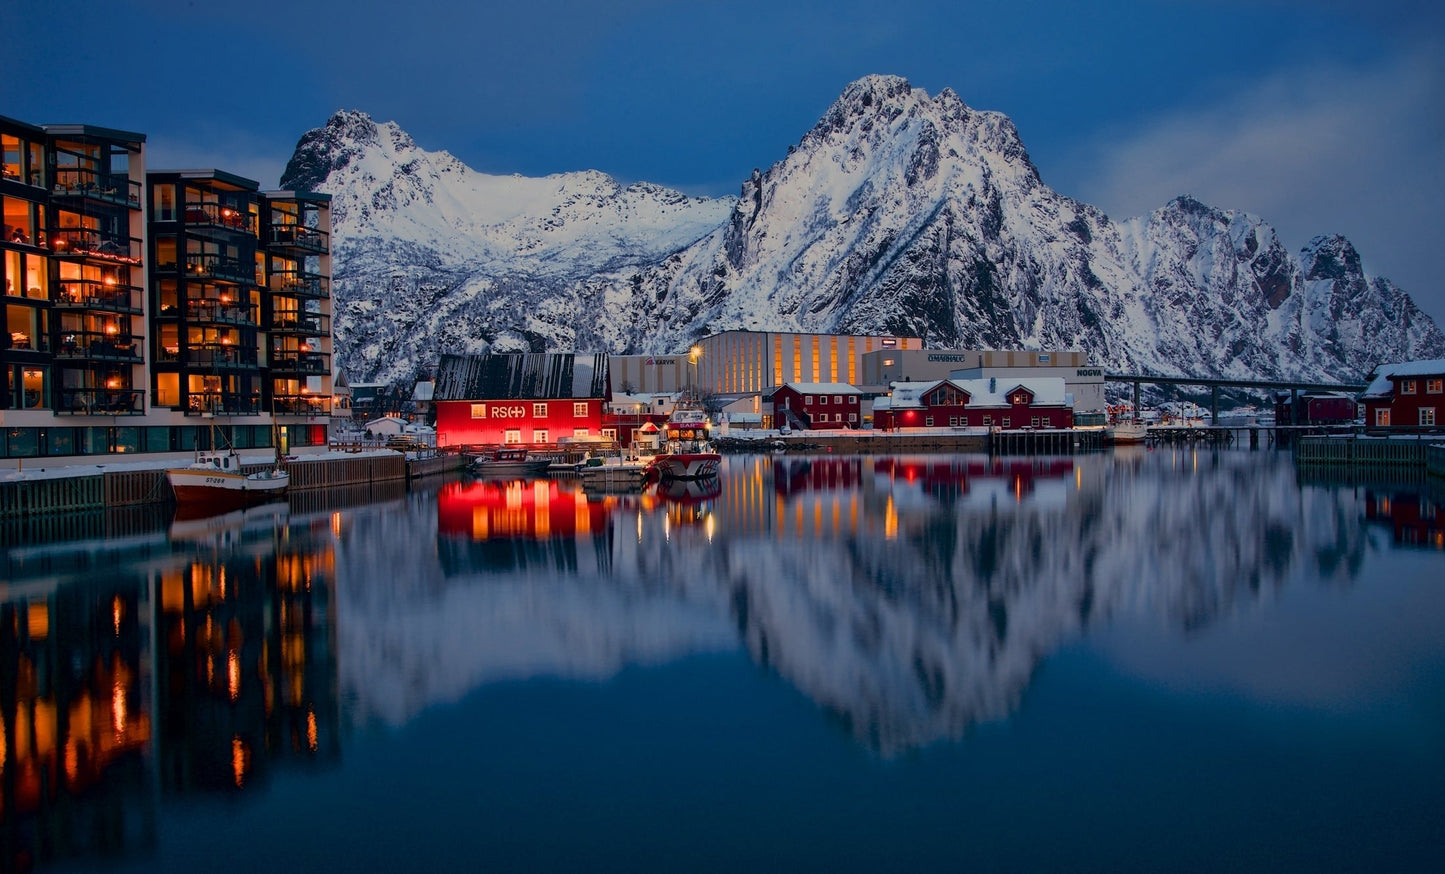 Lake in Lofoten Norway with buildings and snow covered mountains in the background.